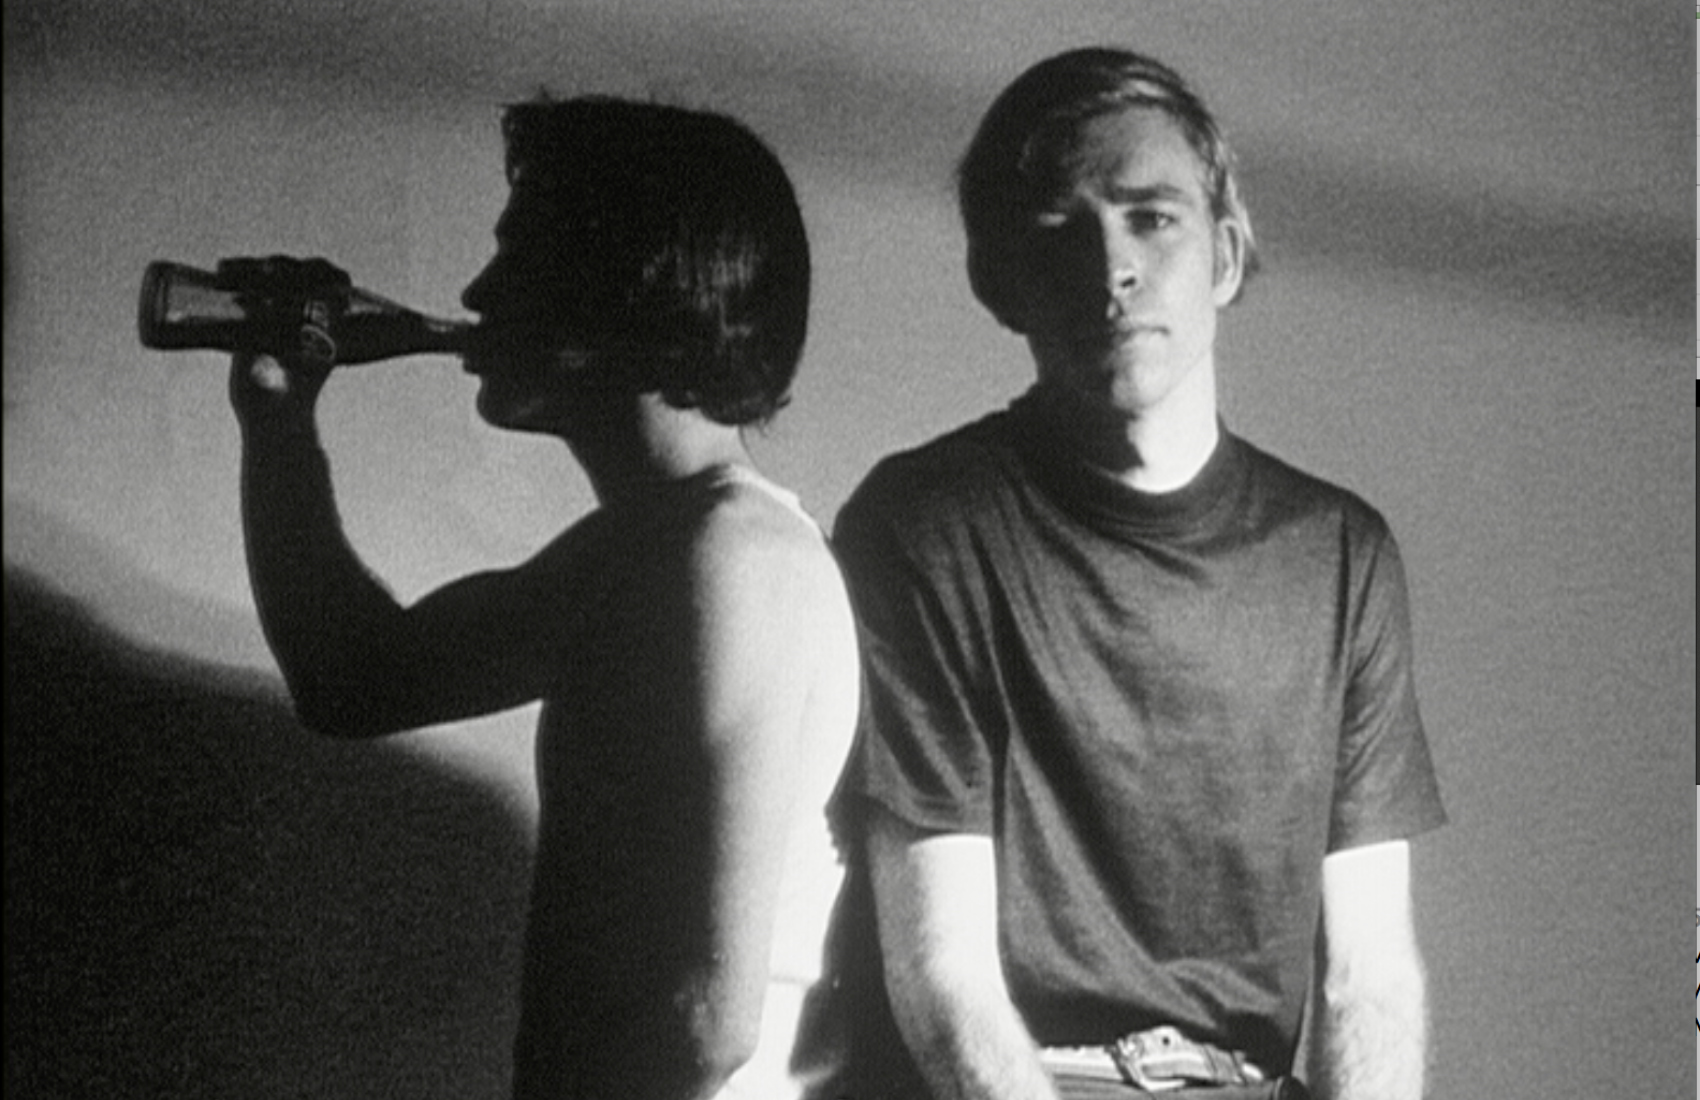 Still from Warhol's short films. Credit: Andy Warhol - Courtesy of Hedges Projects